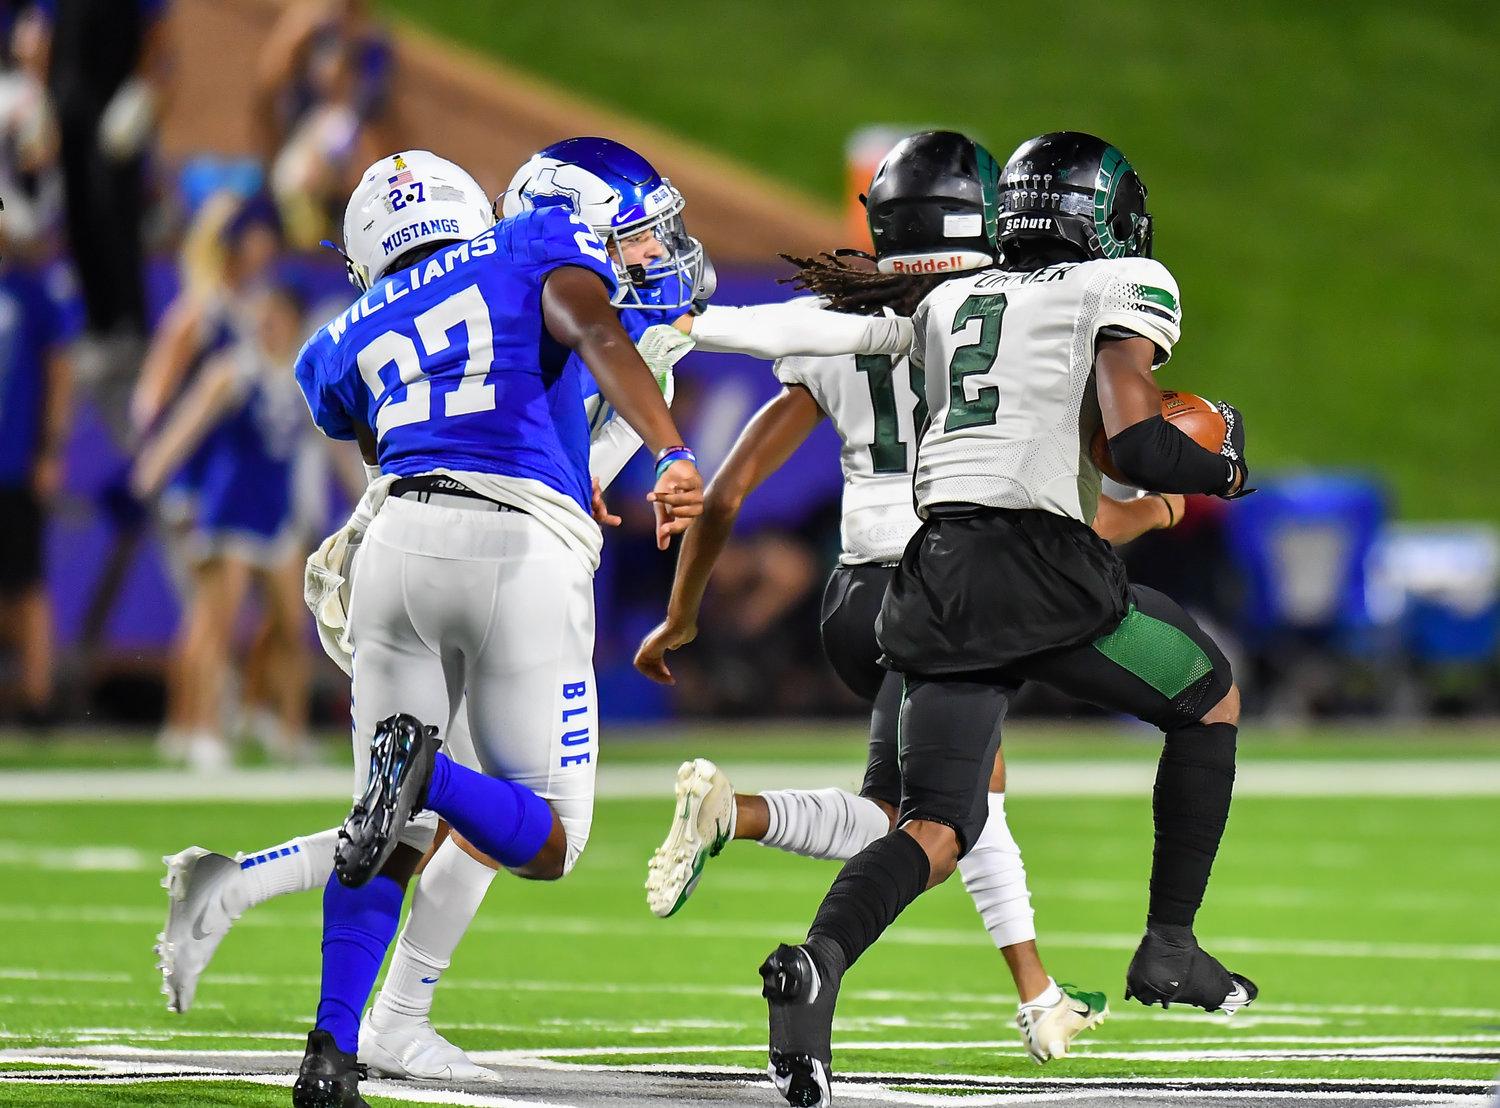 Katy, Tx. Oct. 15, 2021: Mayde Creeks Leroy Turner #2 rushes up the middle scoring TD for the Ram's during a conference game between Mayde Creek and Katy Taylor at Rhodes Stadium. (Photo by Mark Goodman / Katy Times)